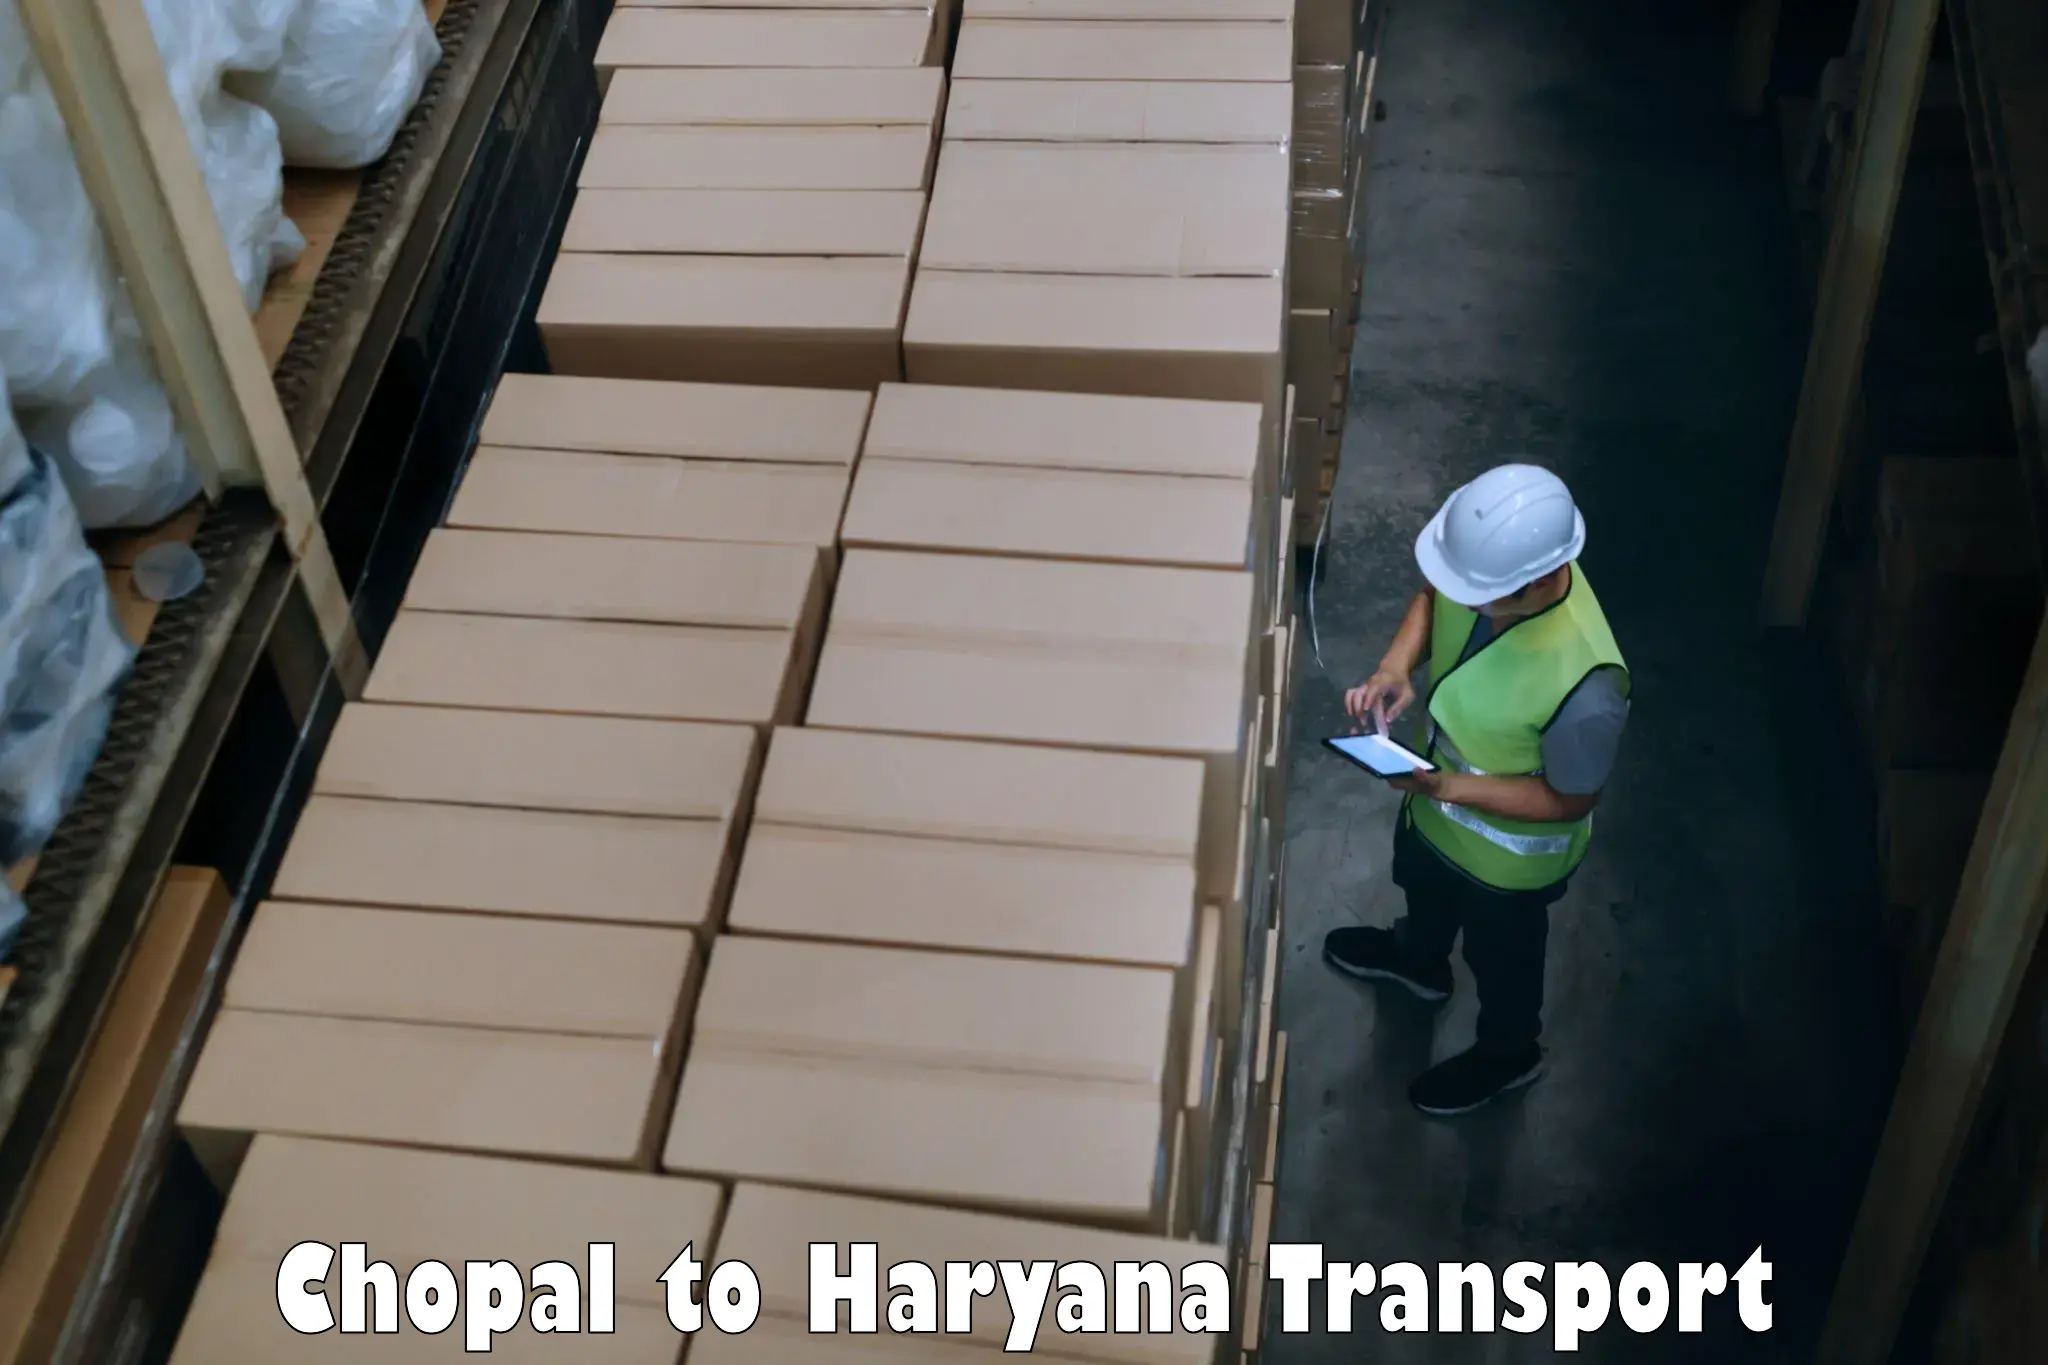 Container transport service Chopal to Haryana